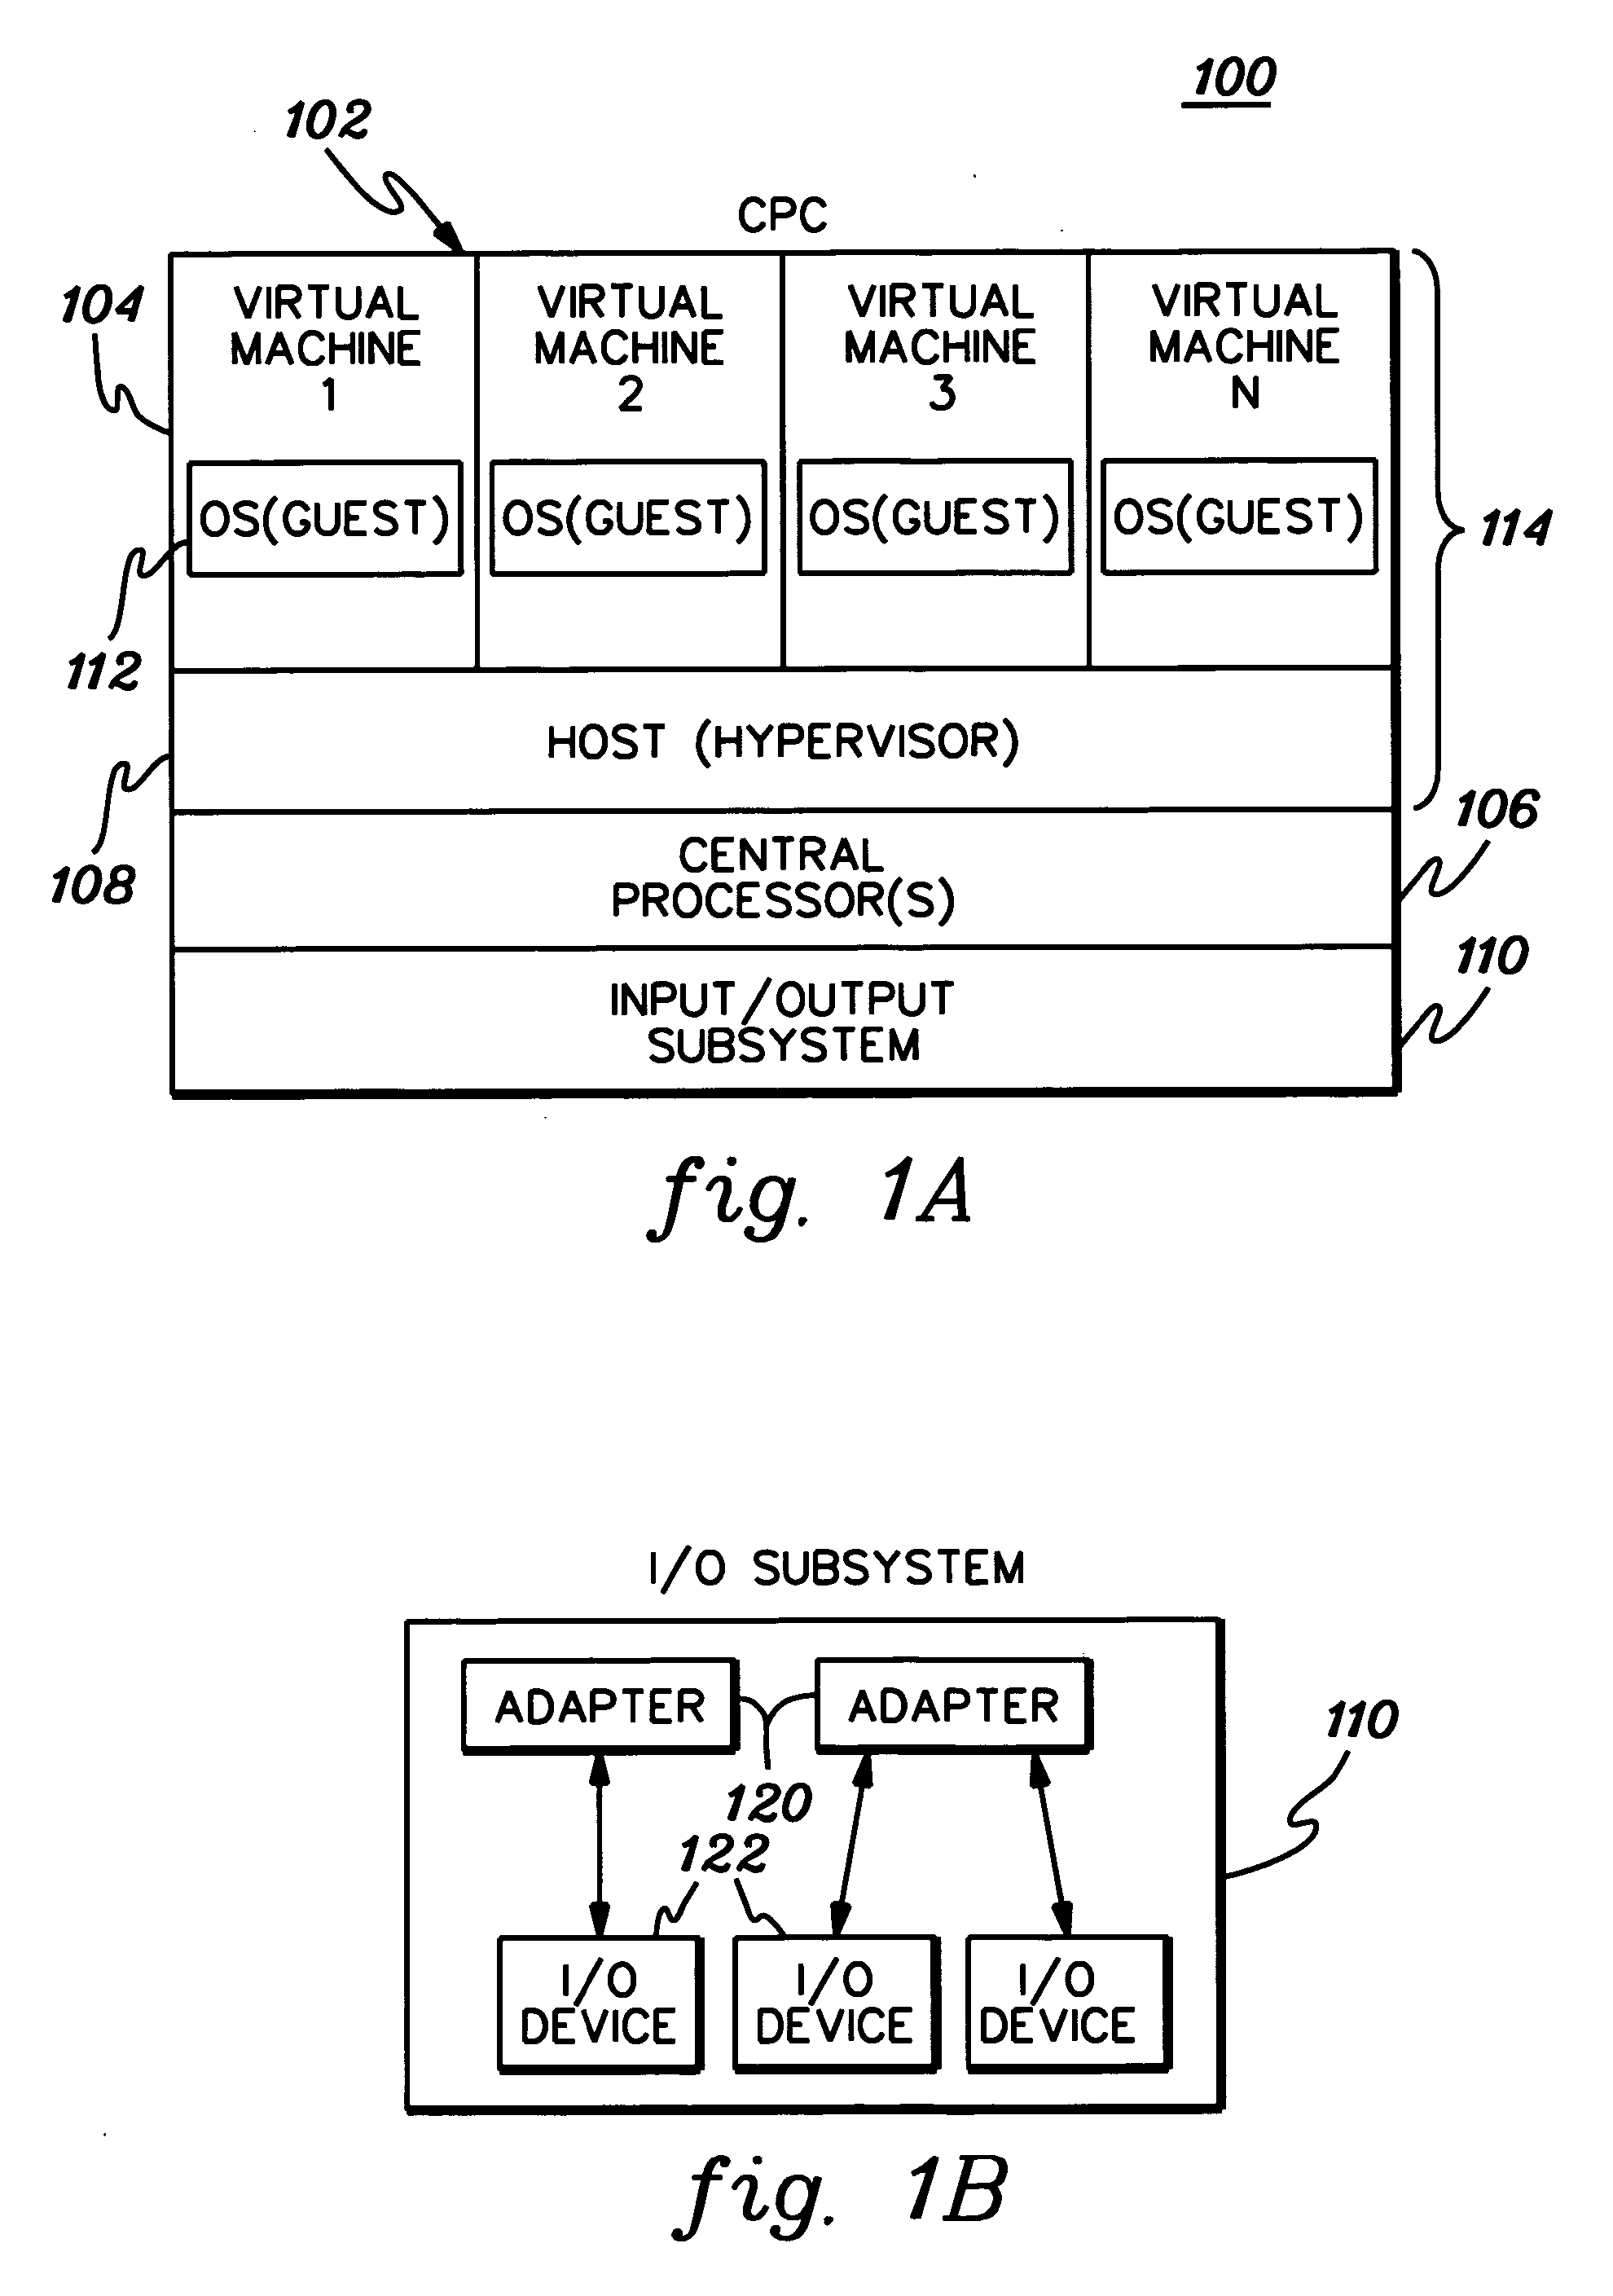 Facilitating processing within computing environments supporting pageable guests